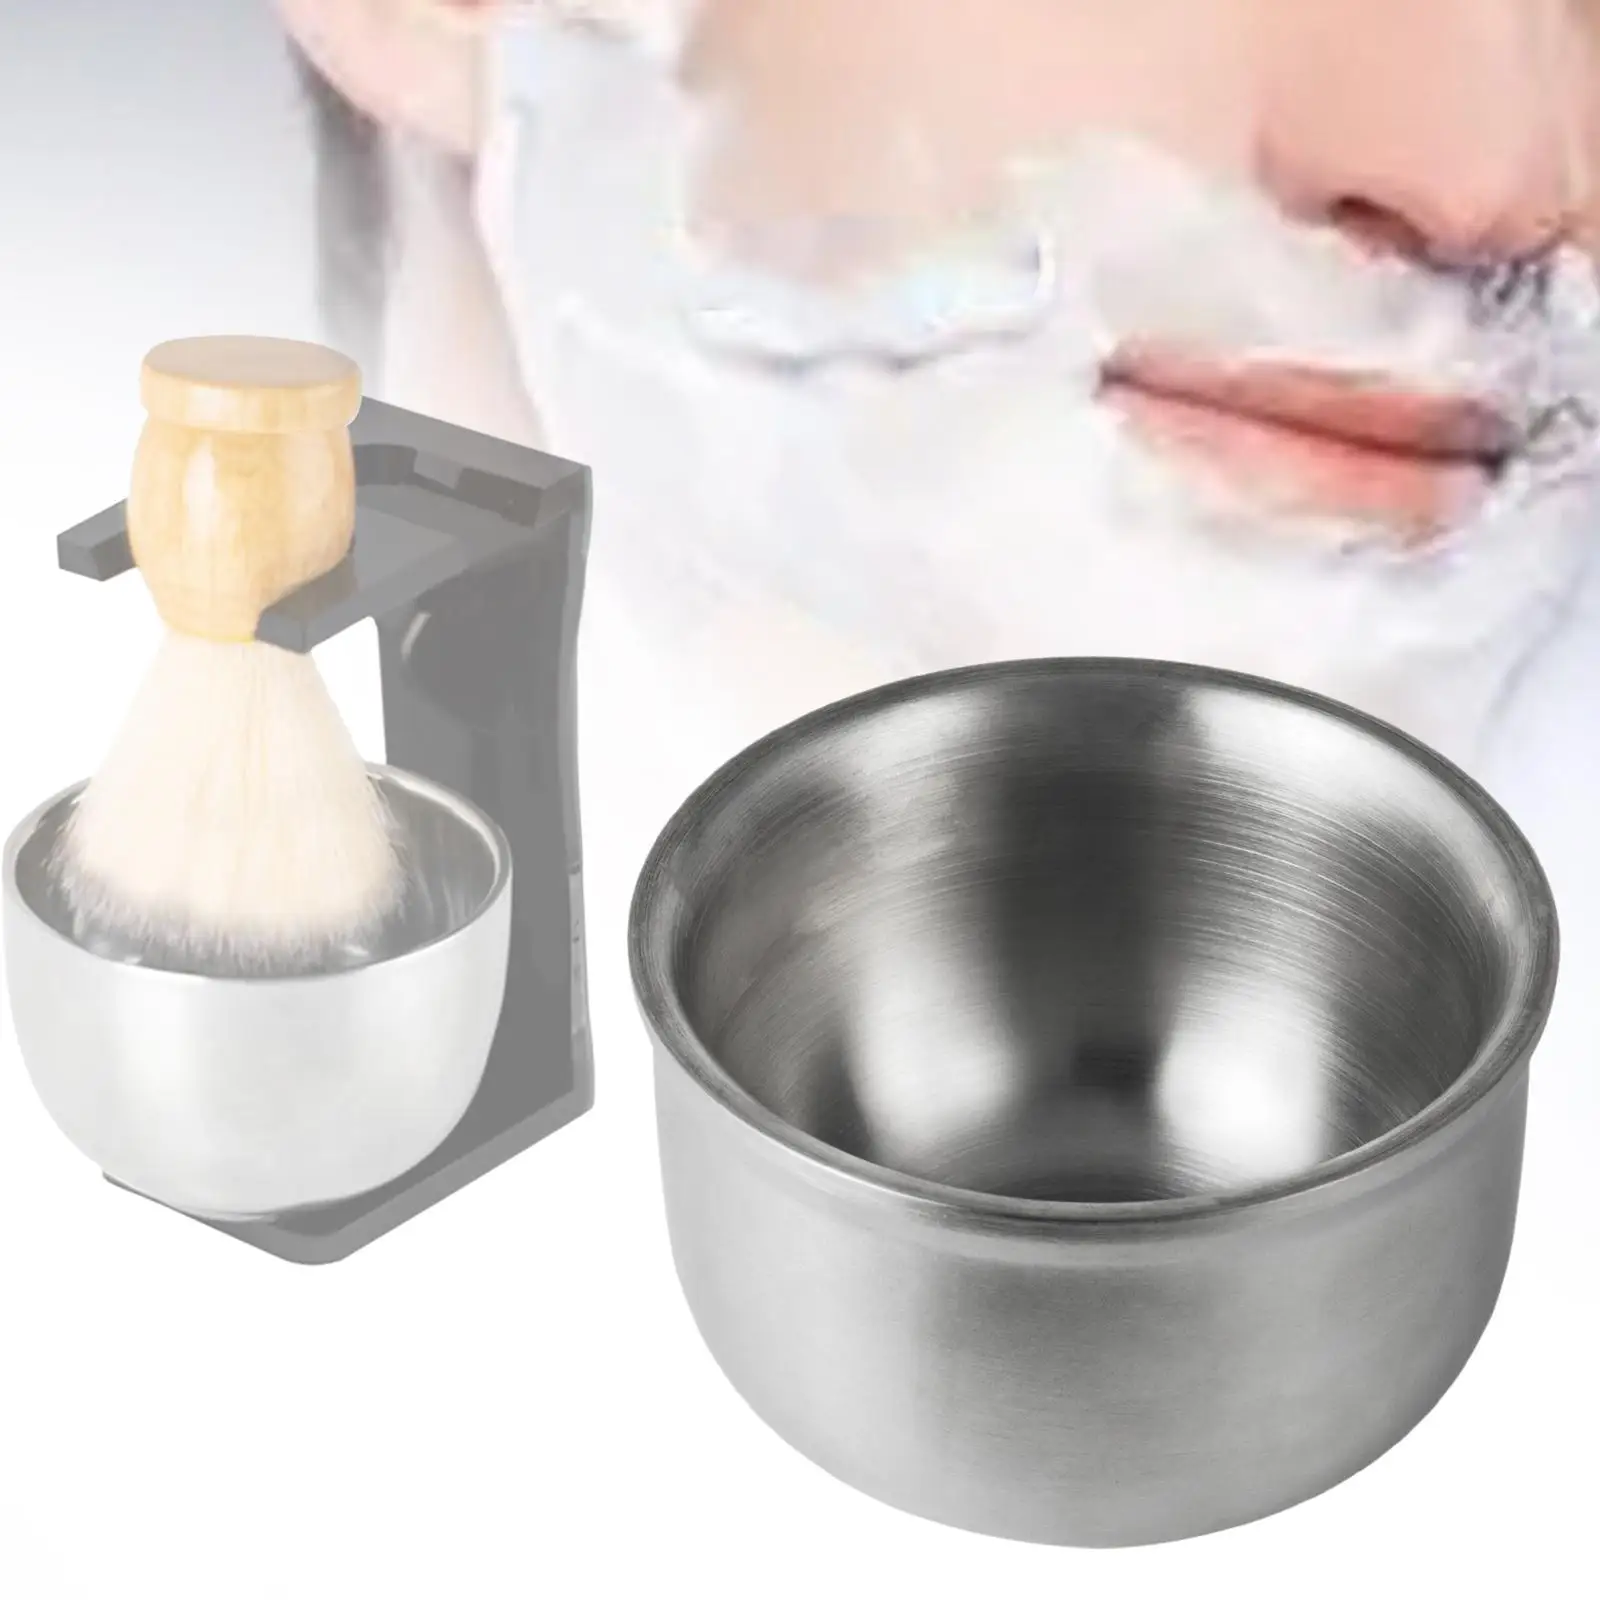 Shaving Soap Bowl Fits Wet Shaving Heat Insulation Keep Warm Better Unbreakable Shave Soap Cup Shaving Cup Shaving Mug for Gift